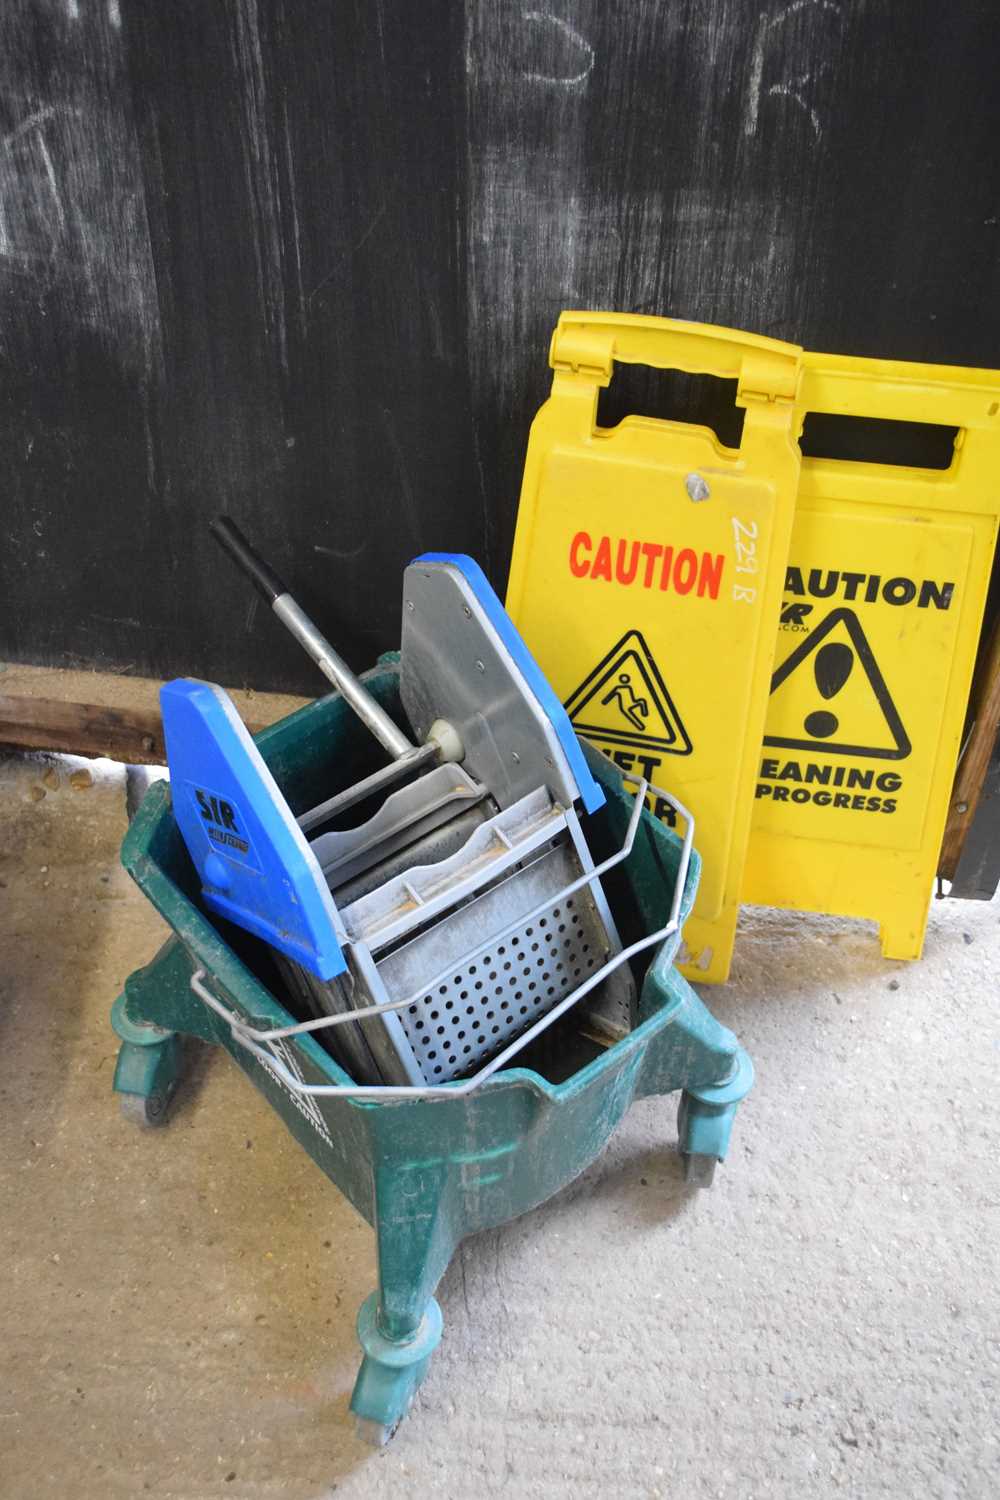 Quantity of hazard signs and cleaning equipment